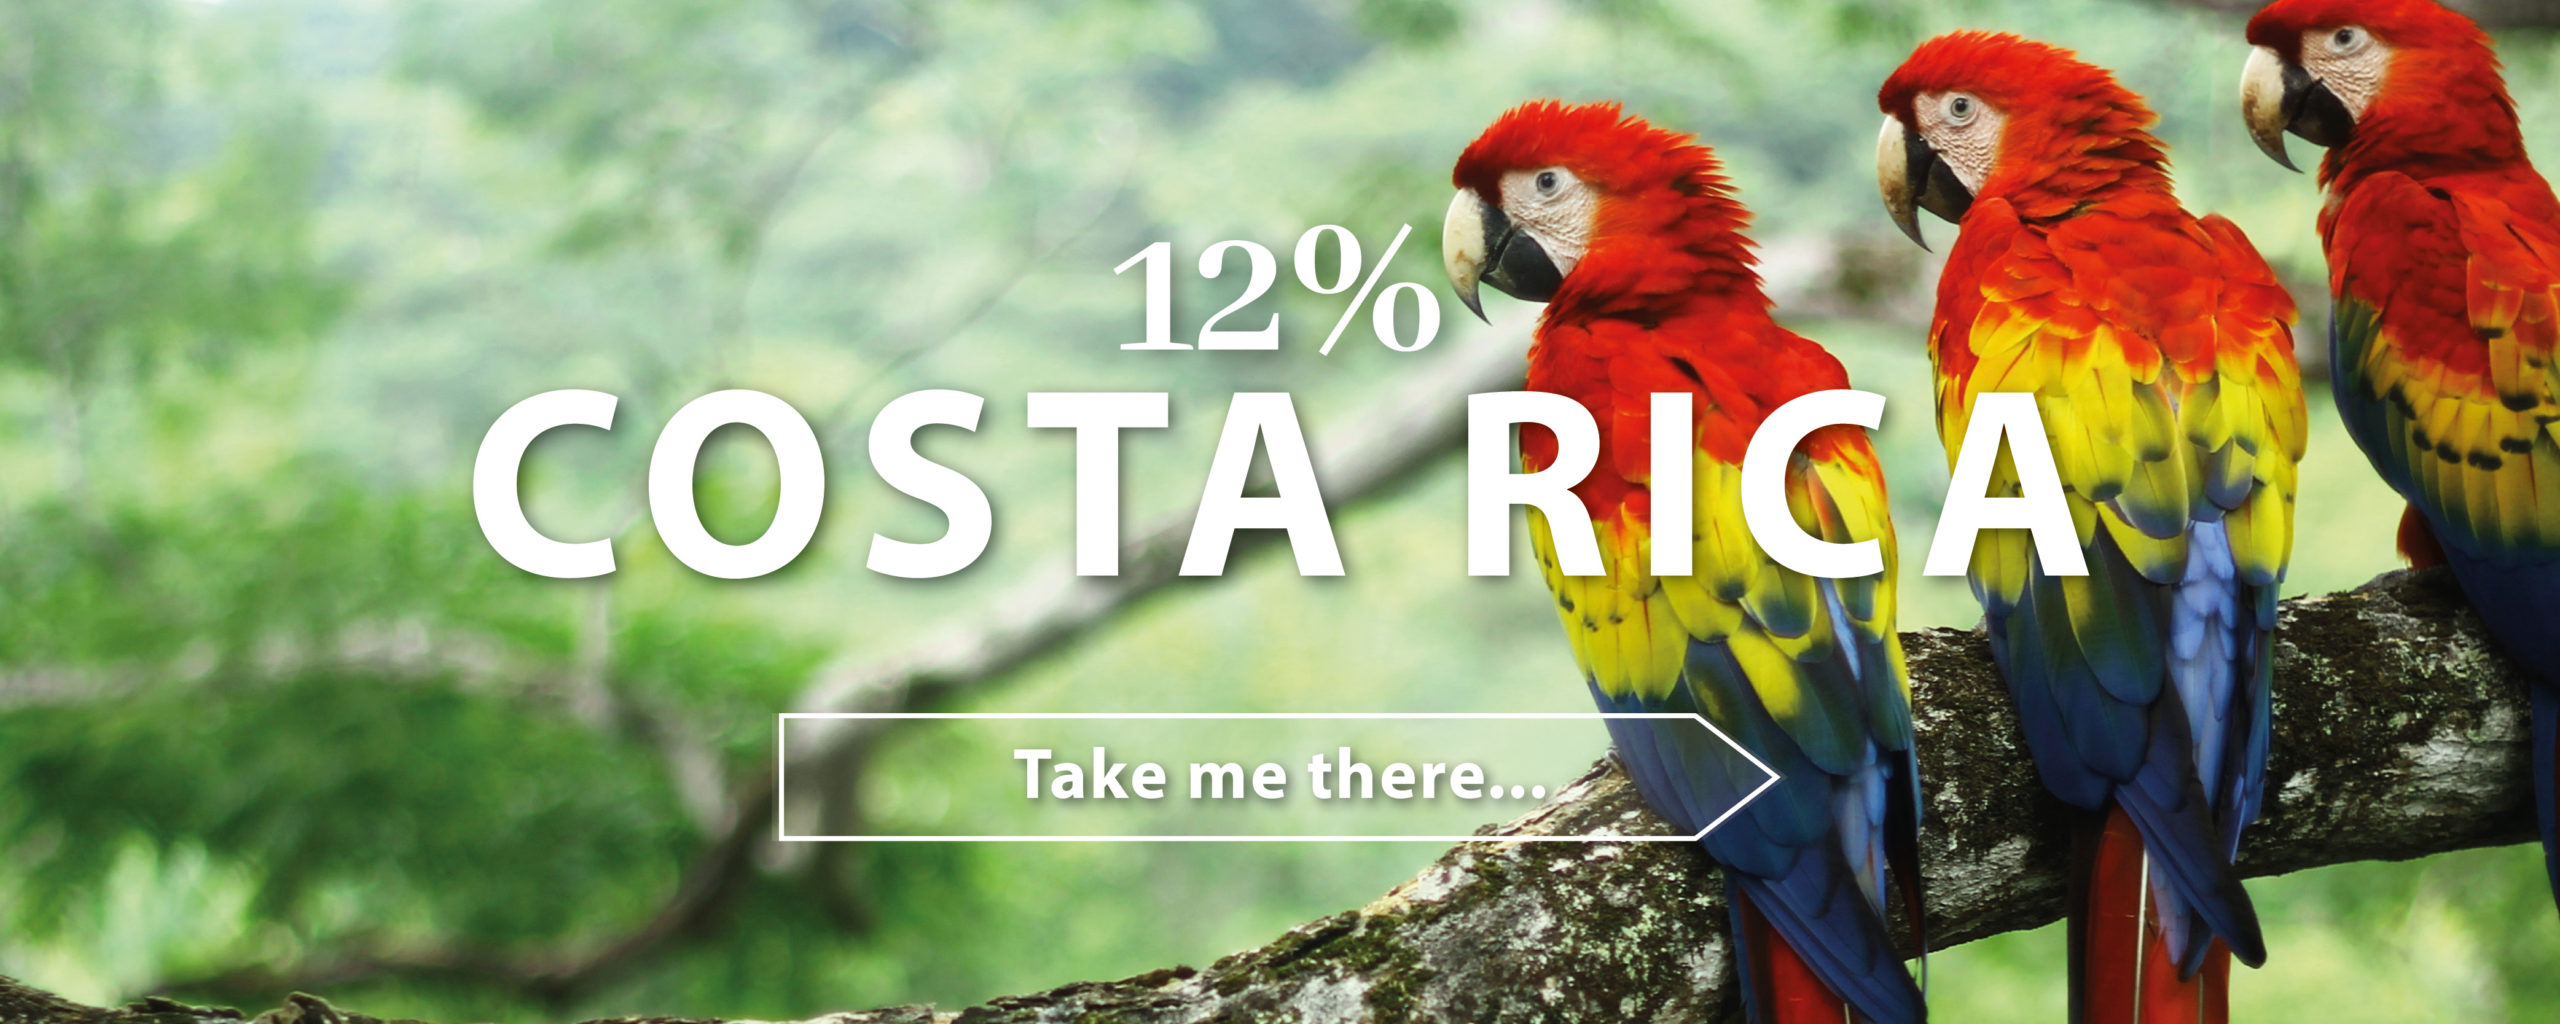 Where youre going this year - Costa Rica